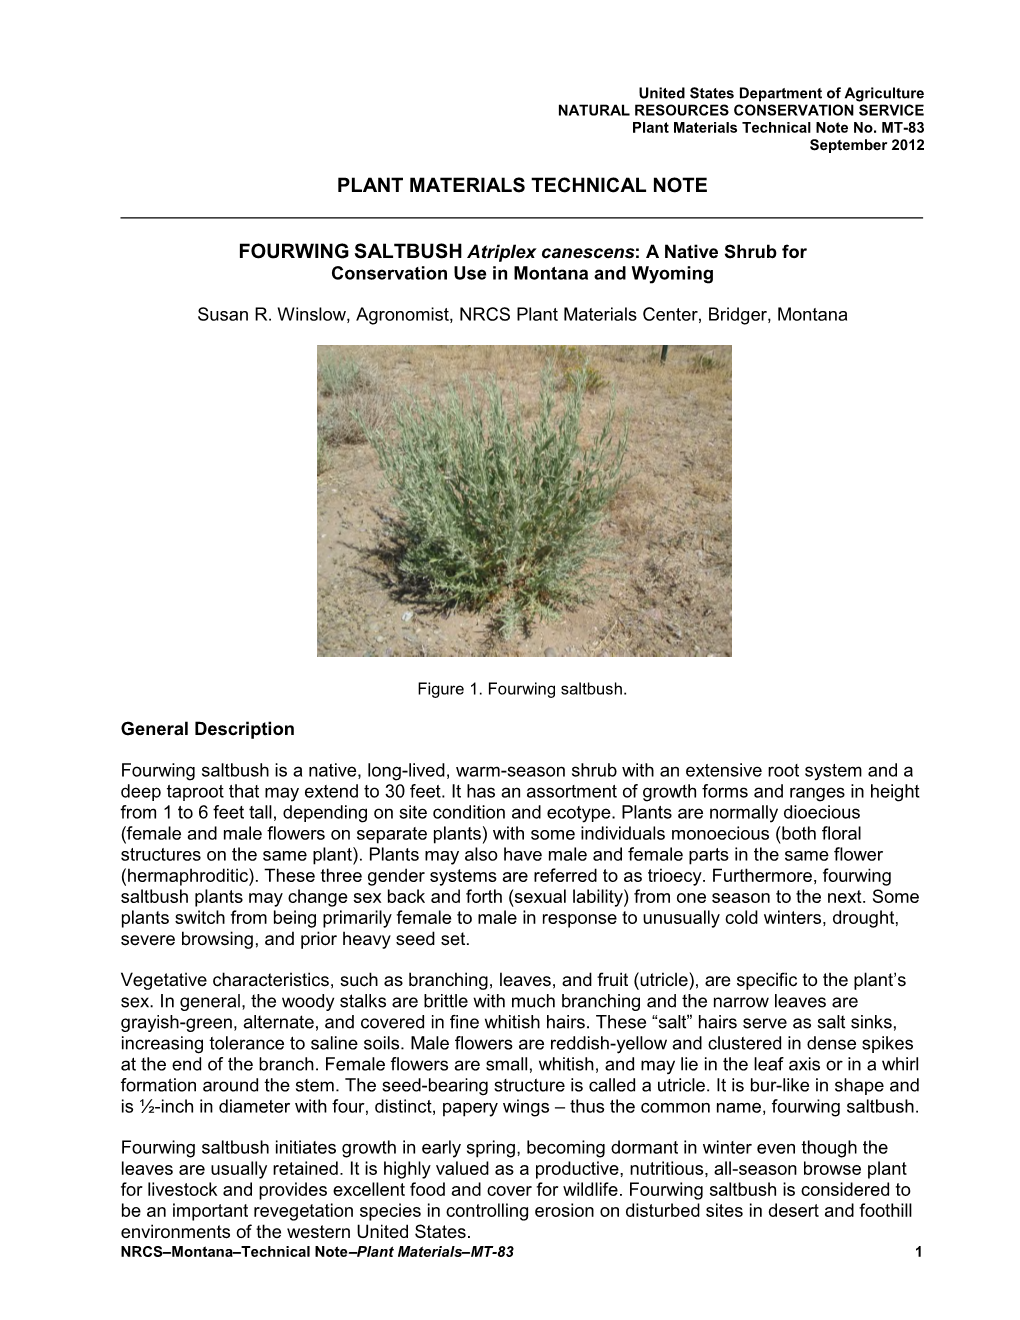 Technical Note MT-83 Fourwing Saltbush As a Native Conservation